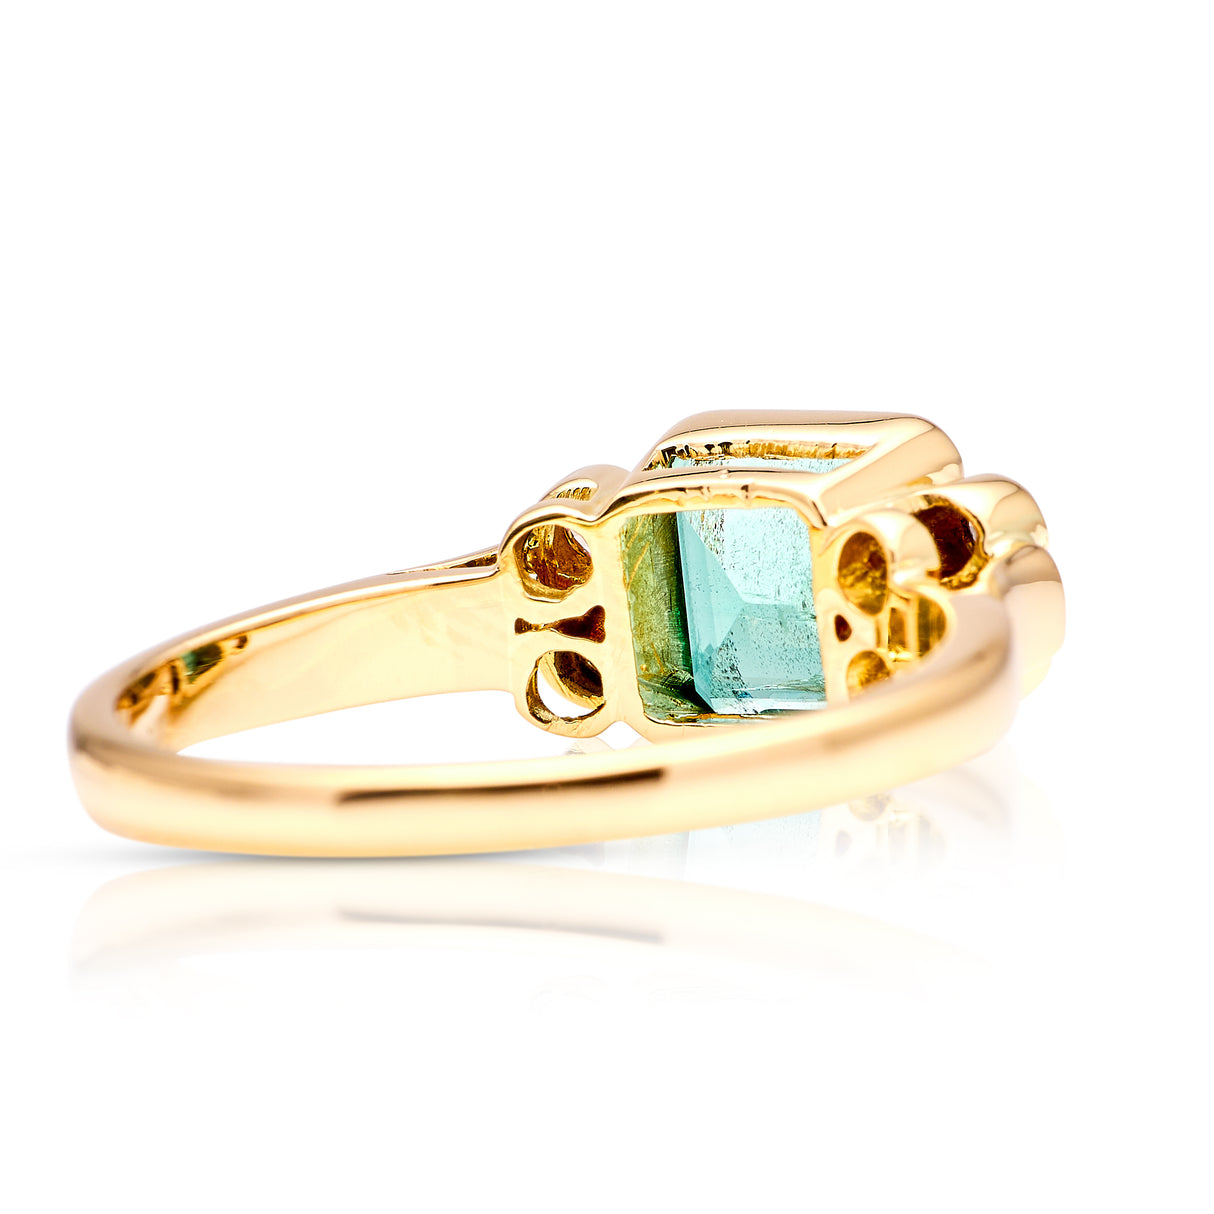 Vintage, emerald and diamond ring, 18ct yellow gold